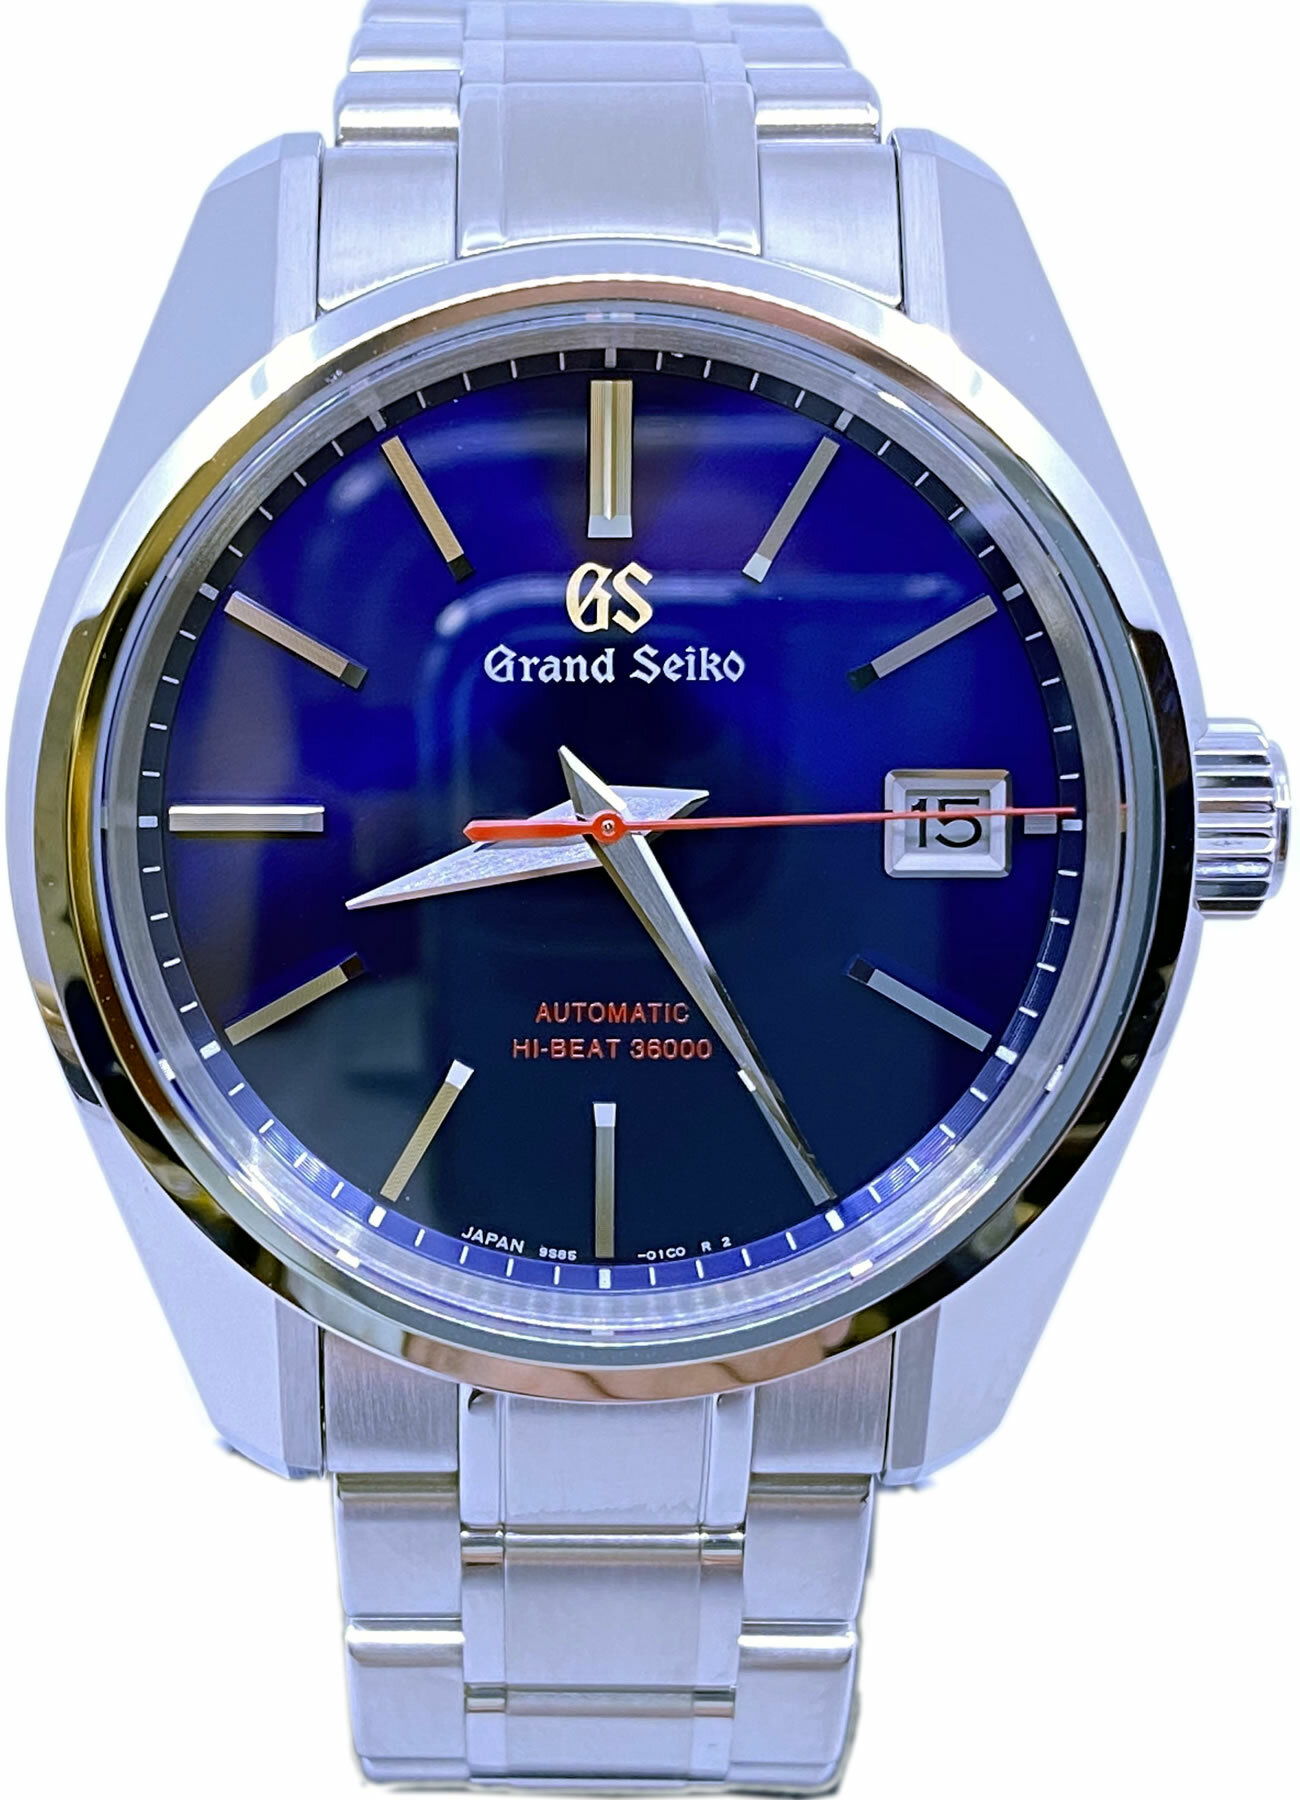 Grand Seiko SBGH281 Limited Edition - Exquisite Timepieces